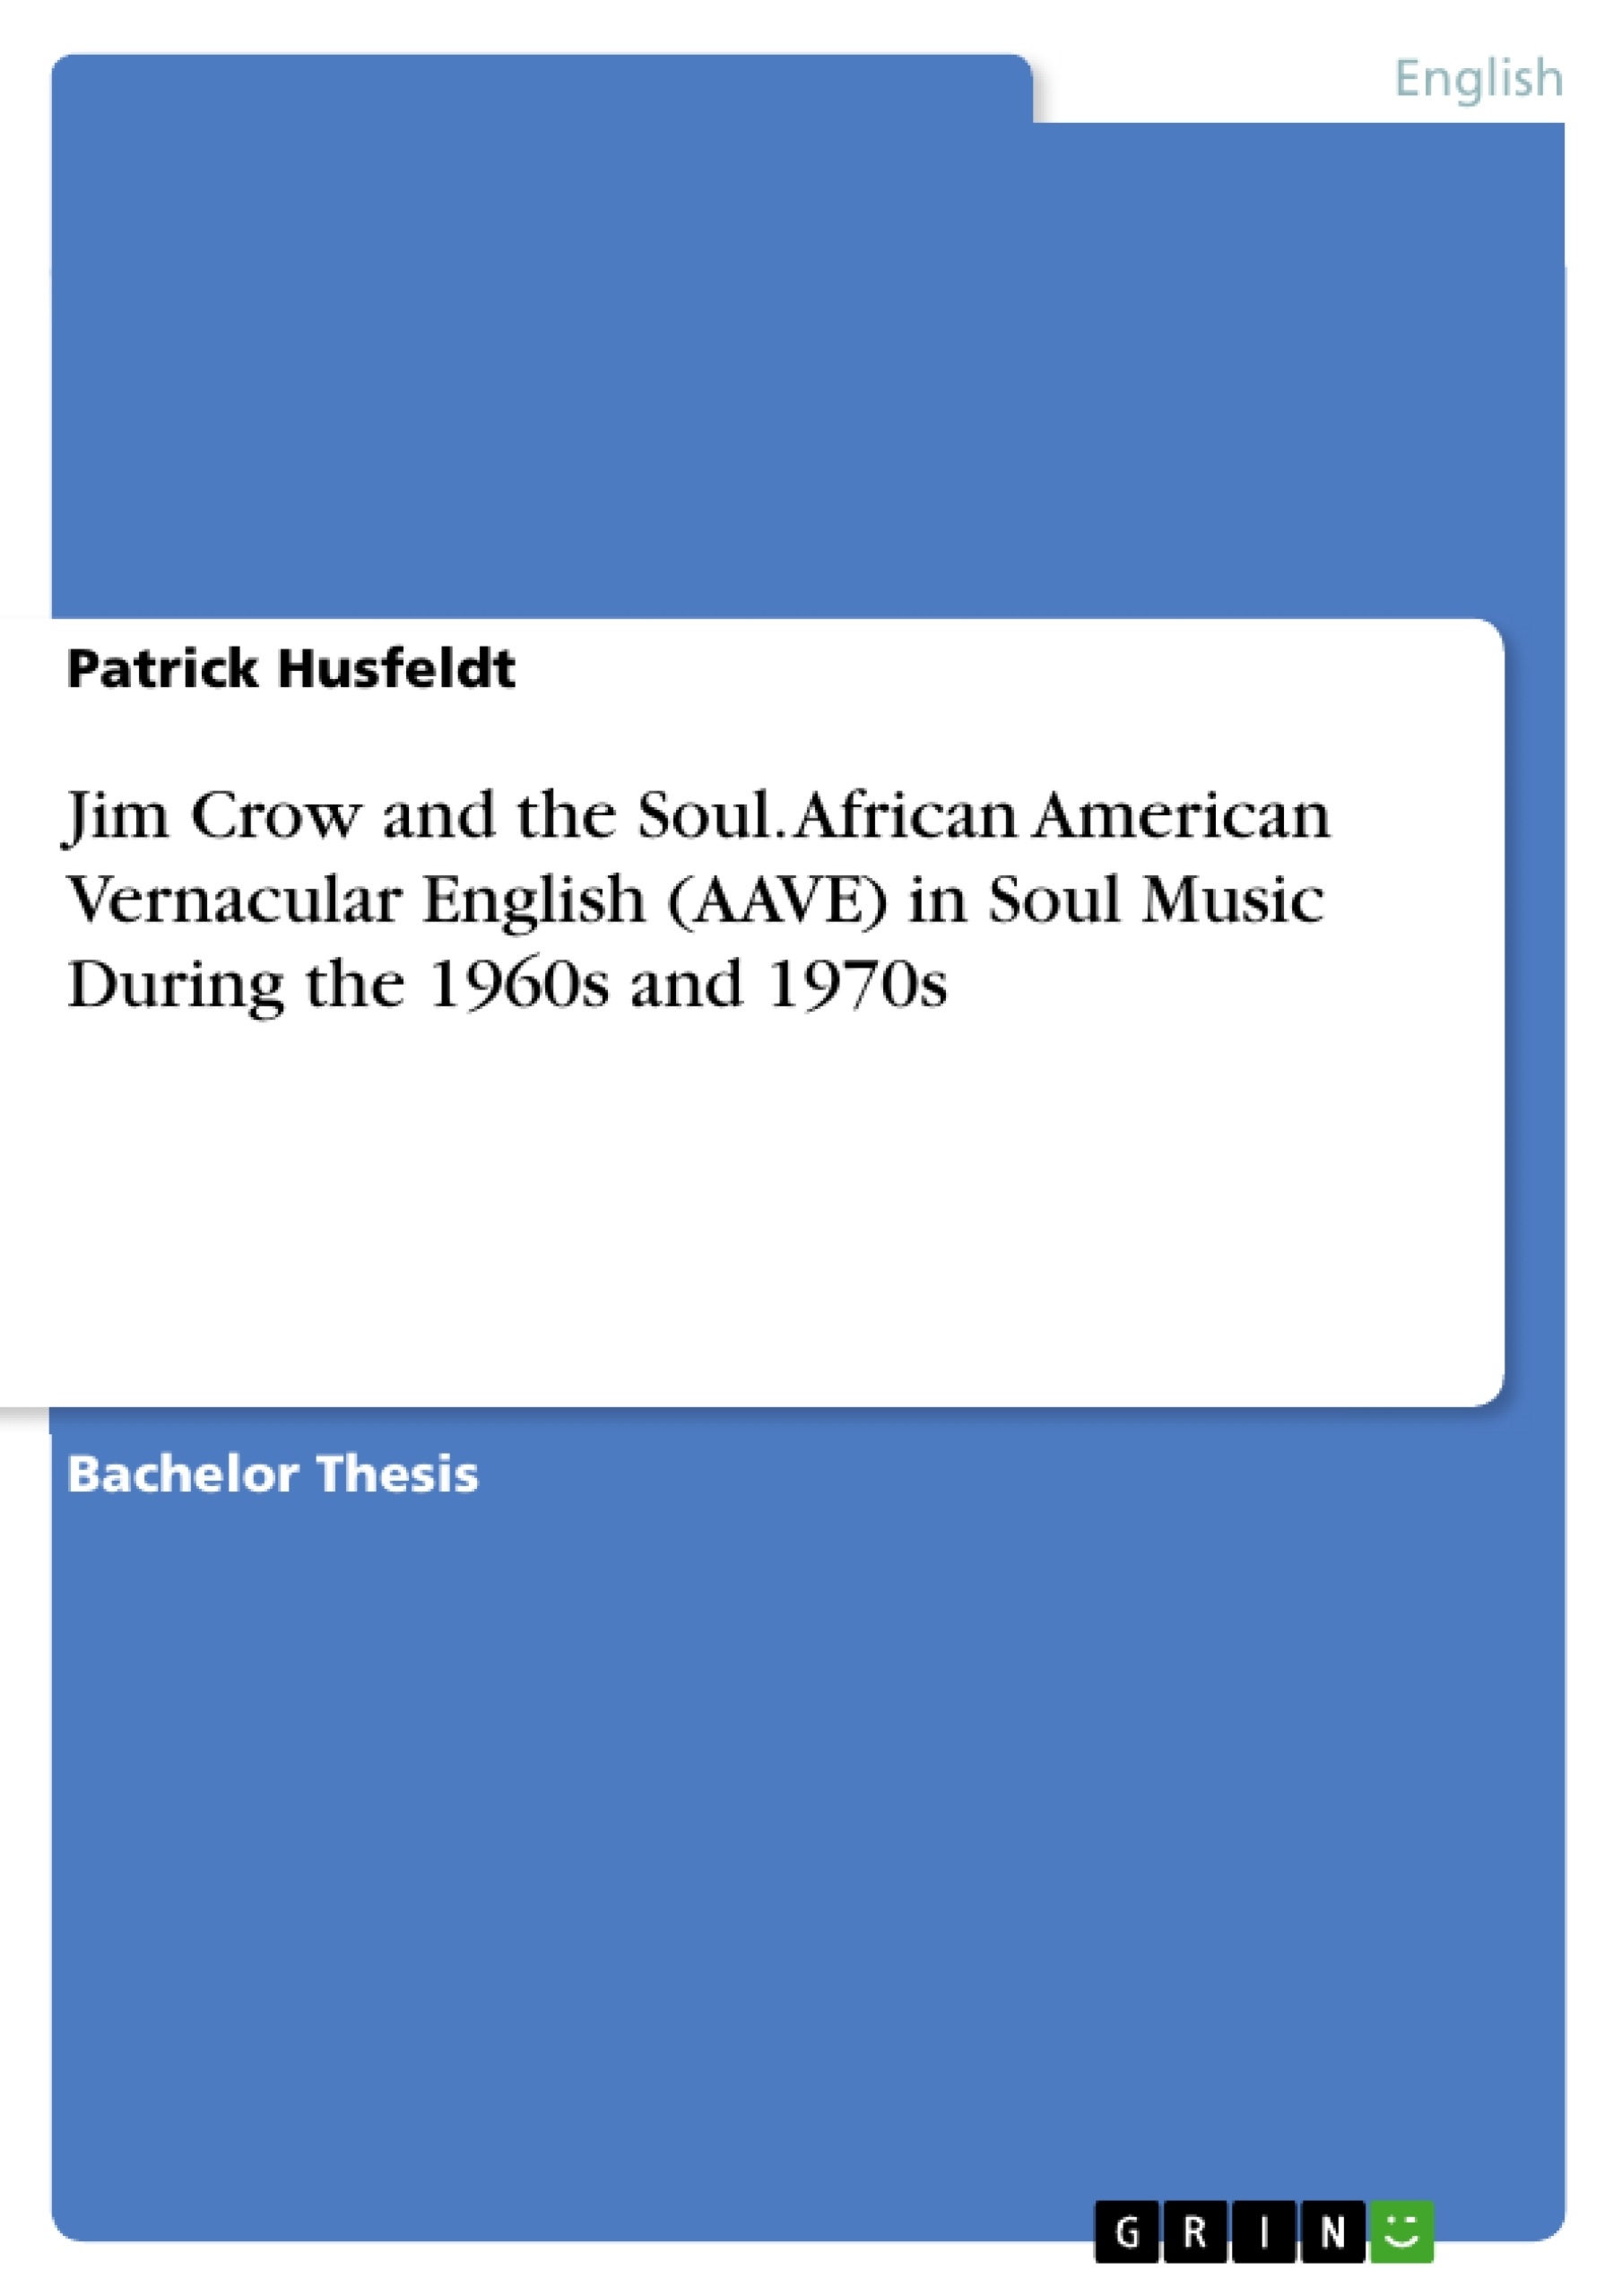 Title: Jim Crow and the Soul. African American Vernacular English (AAVE) in Soul Music During the 1960s and 1970s